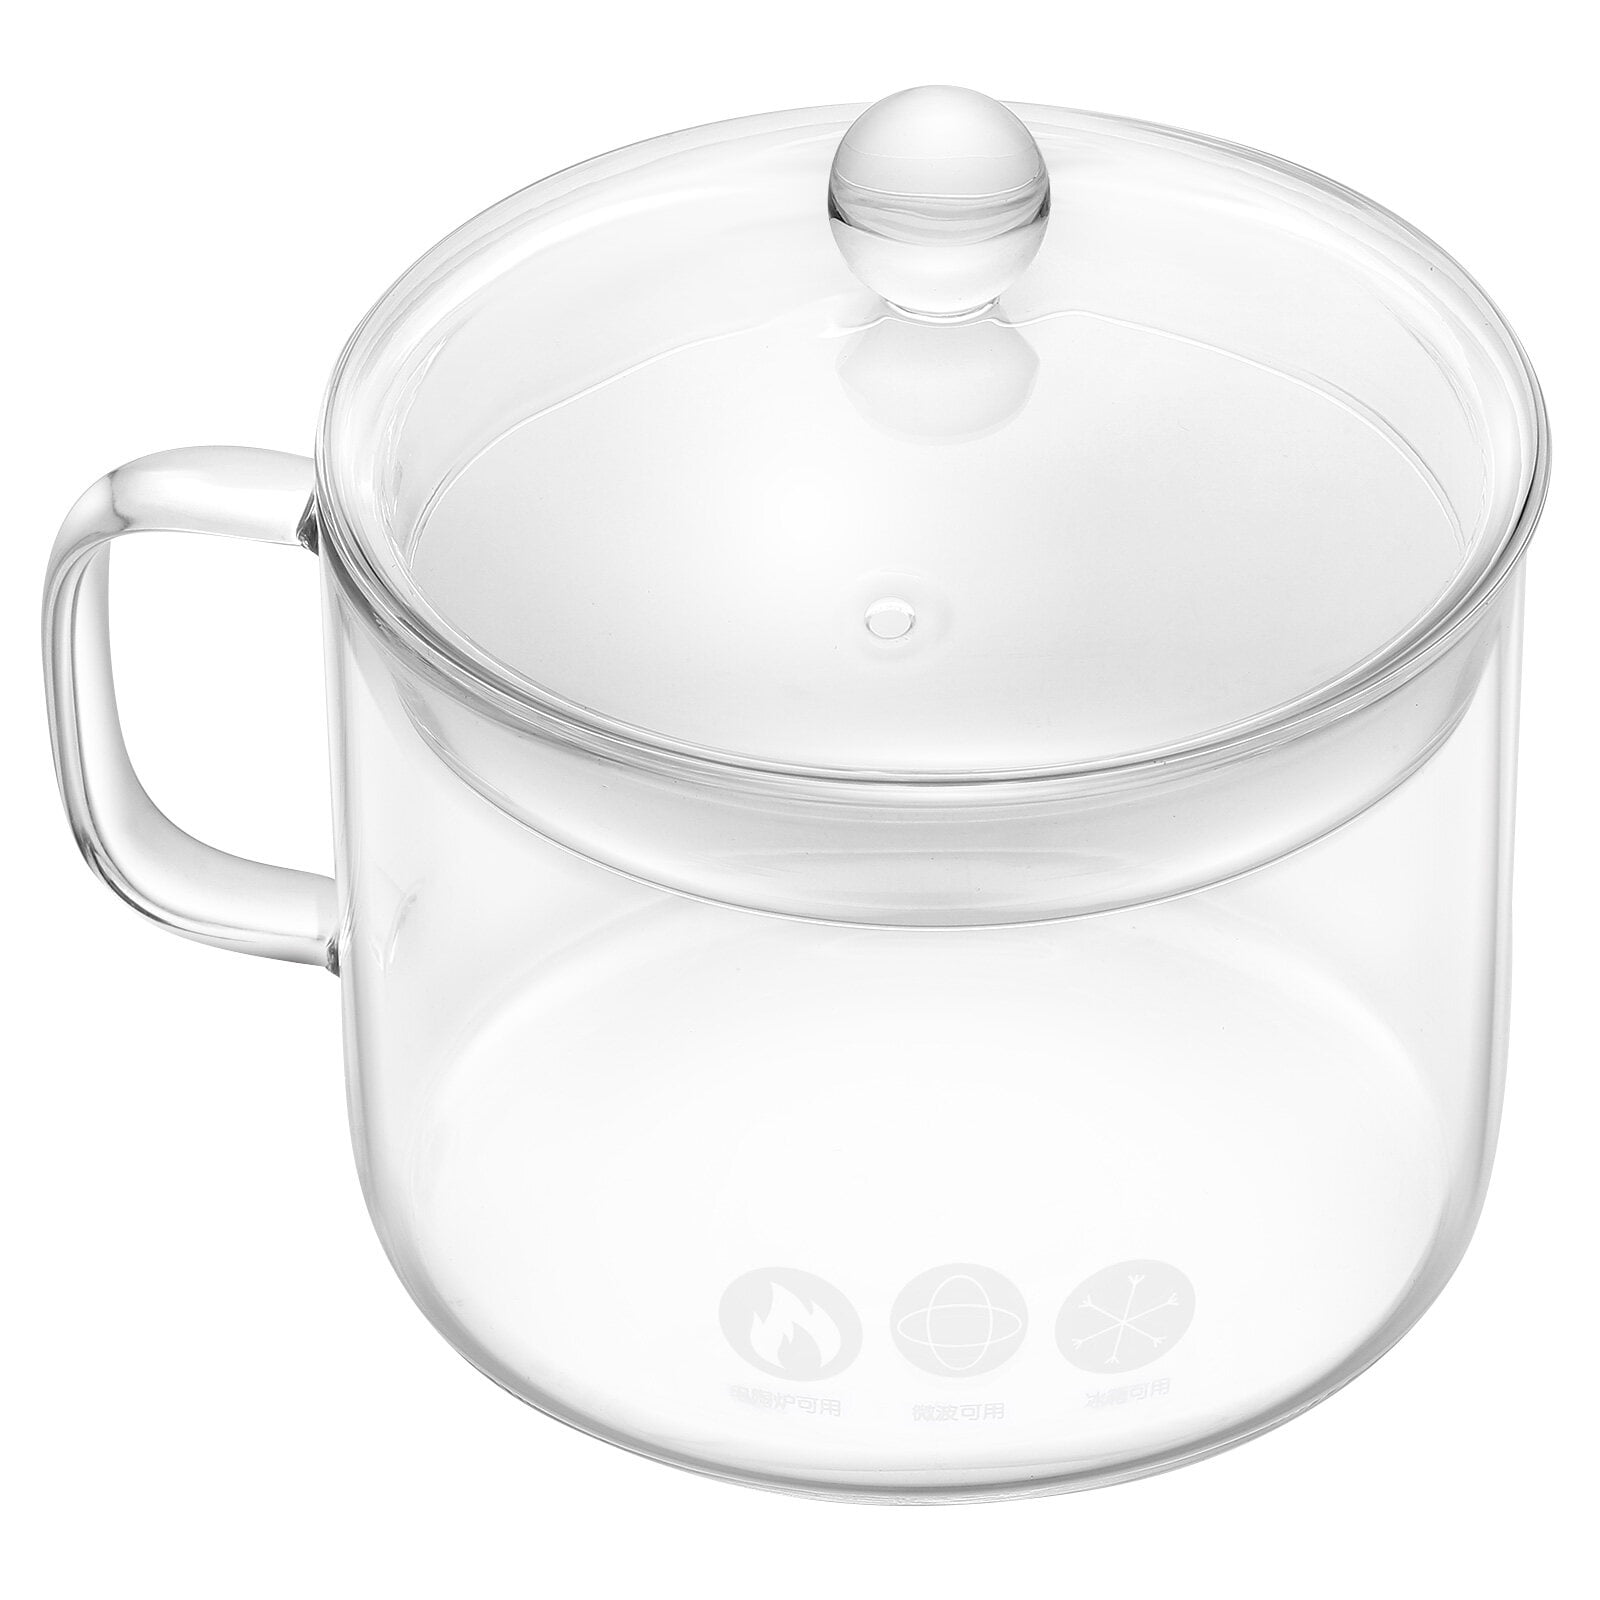 FILULA 64oz Glass Pot with Lid and Serving Bowl included as a Set - Clear  Pots for Cooking Set - Glass Simmer Pot For Stove Top - Versatile Glass